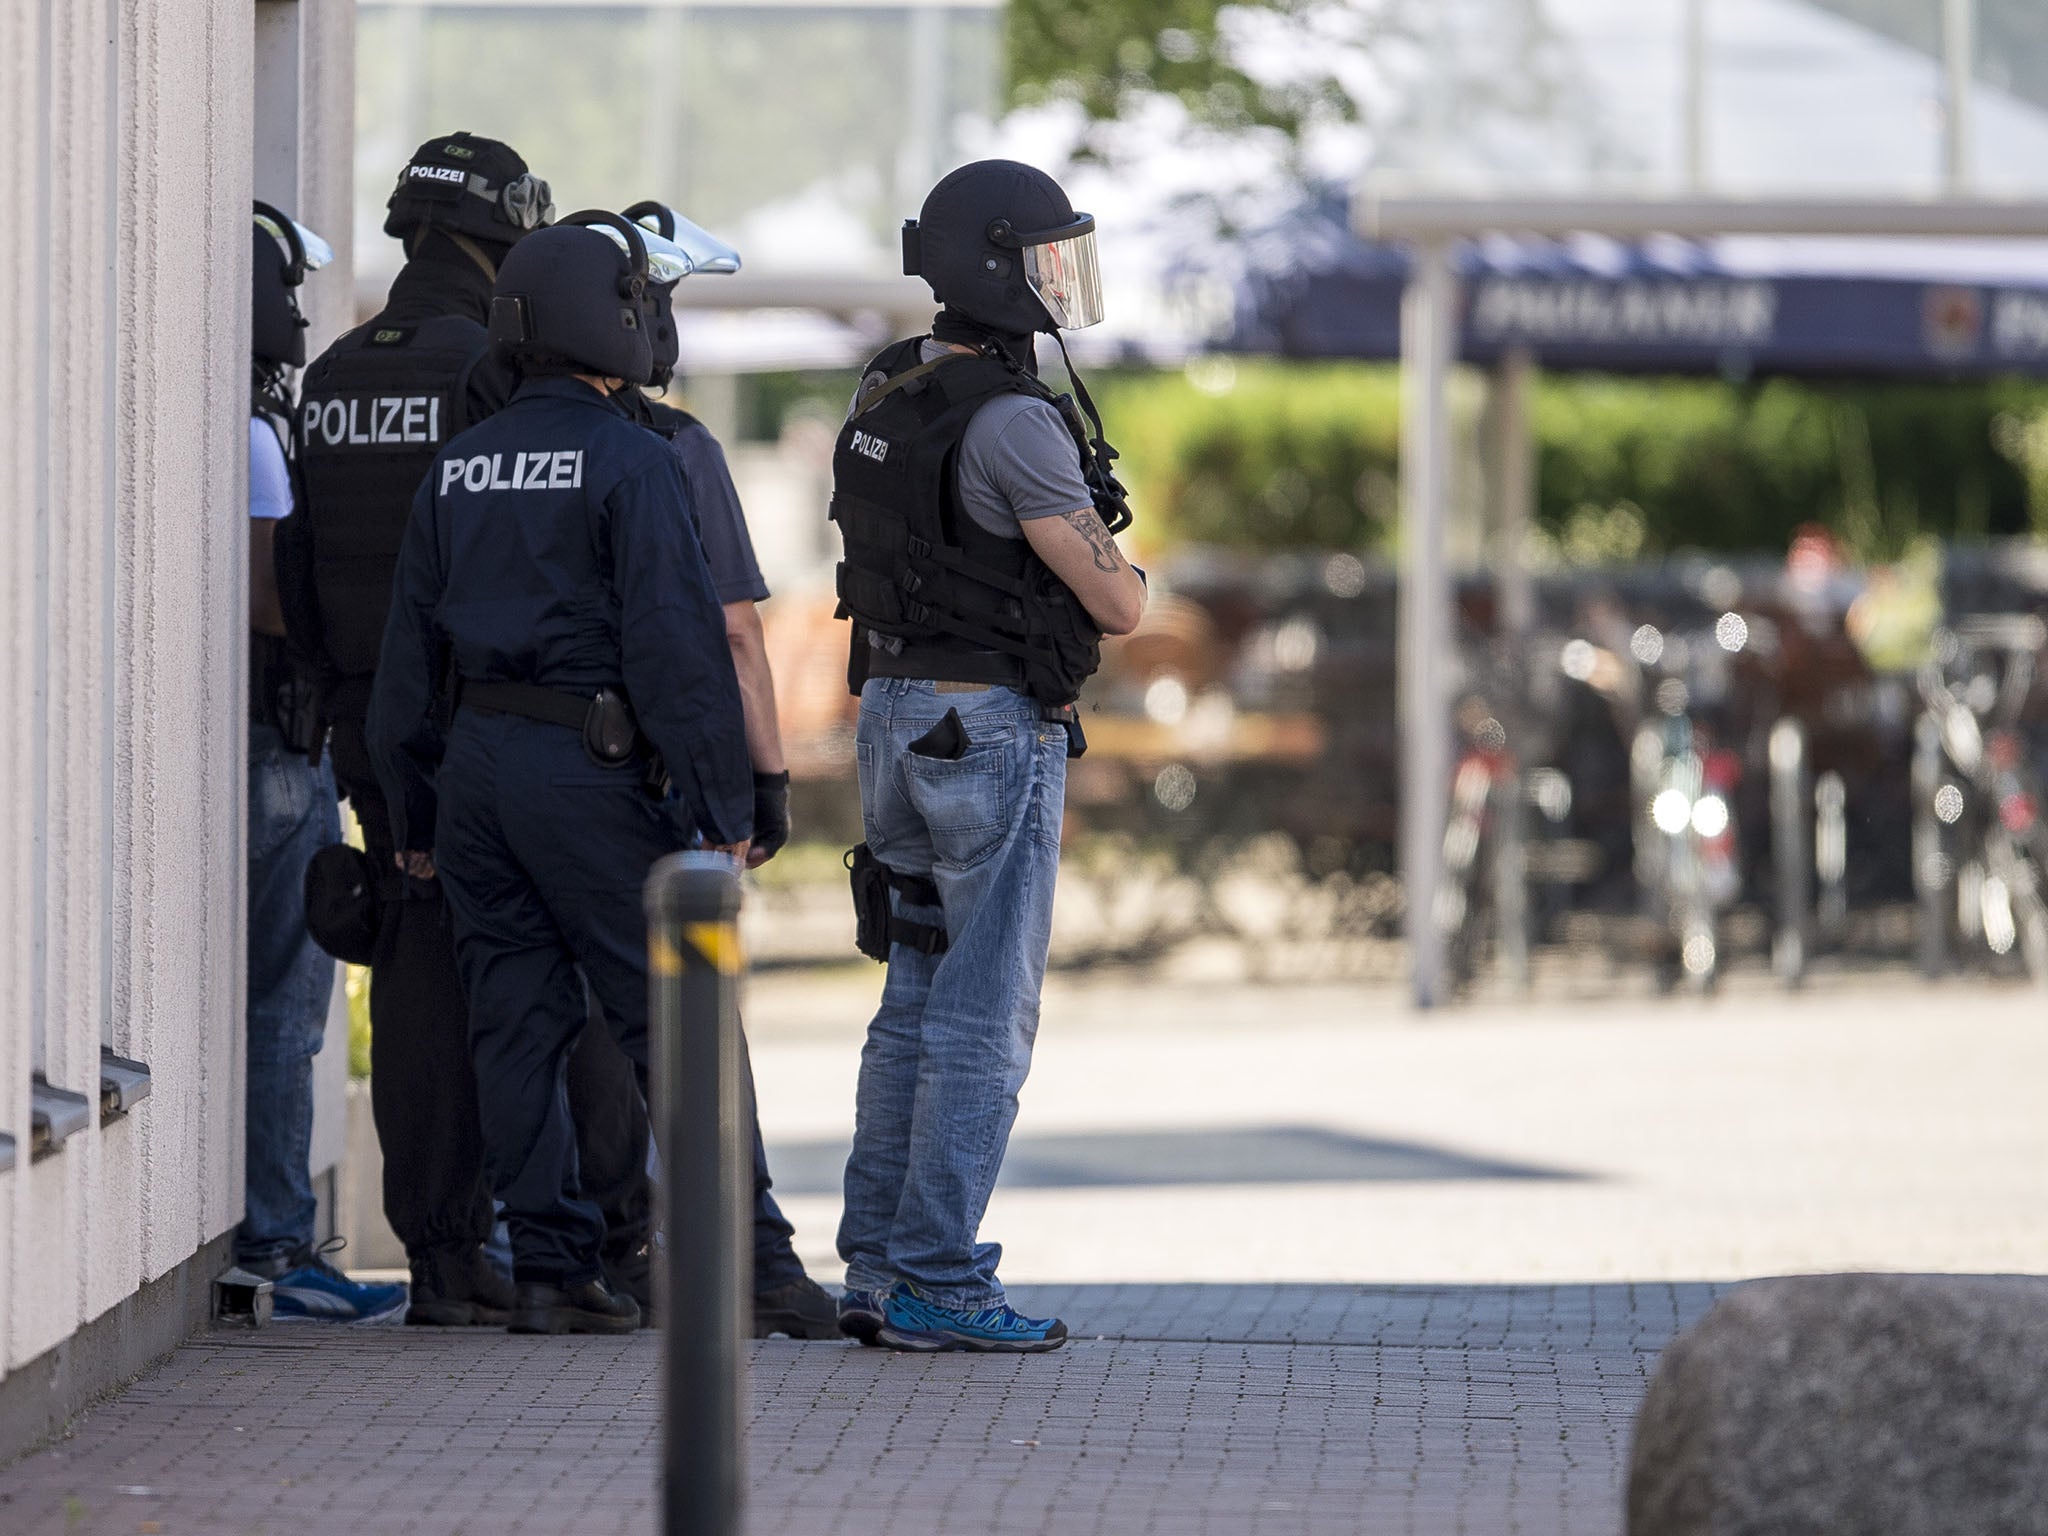 German police attending a hostage situation in Vierheim, Germany last month